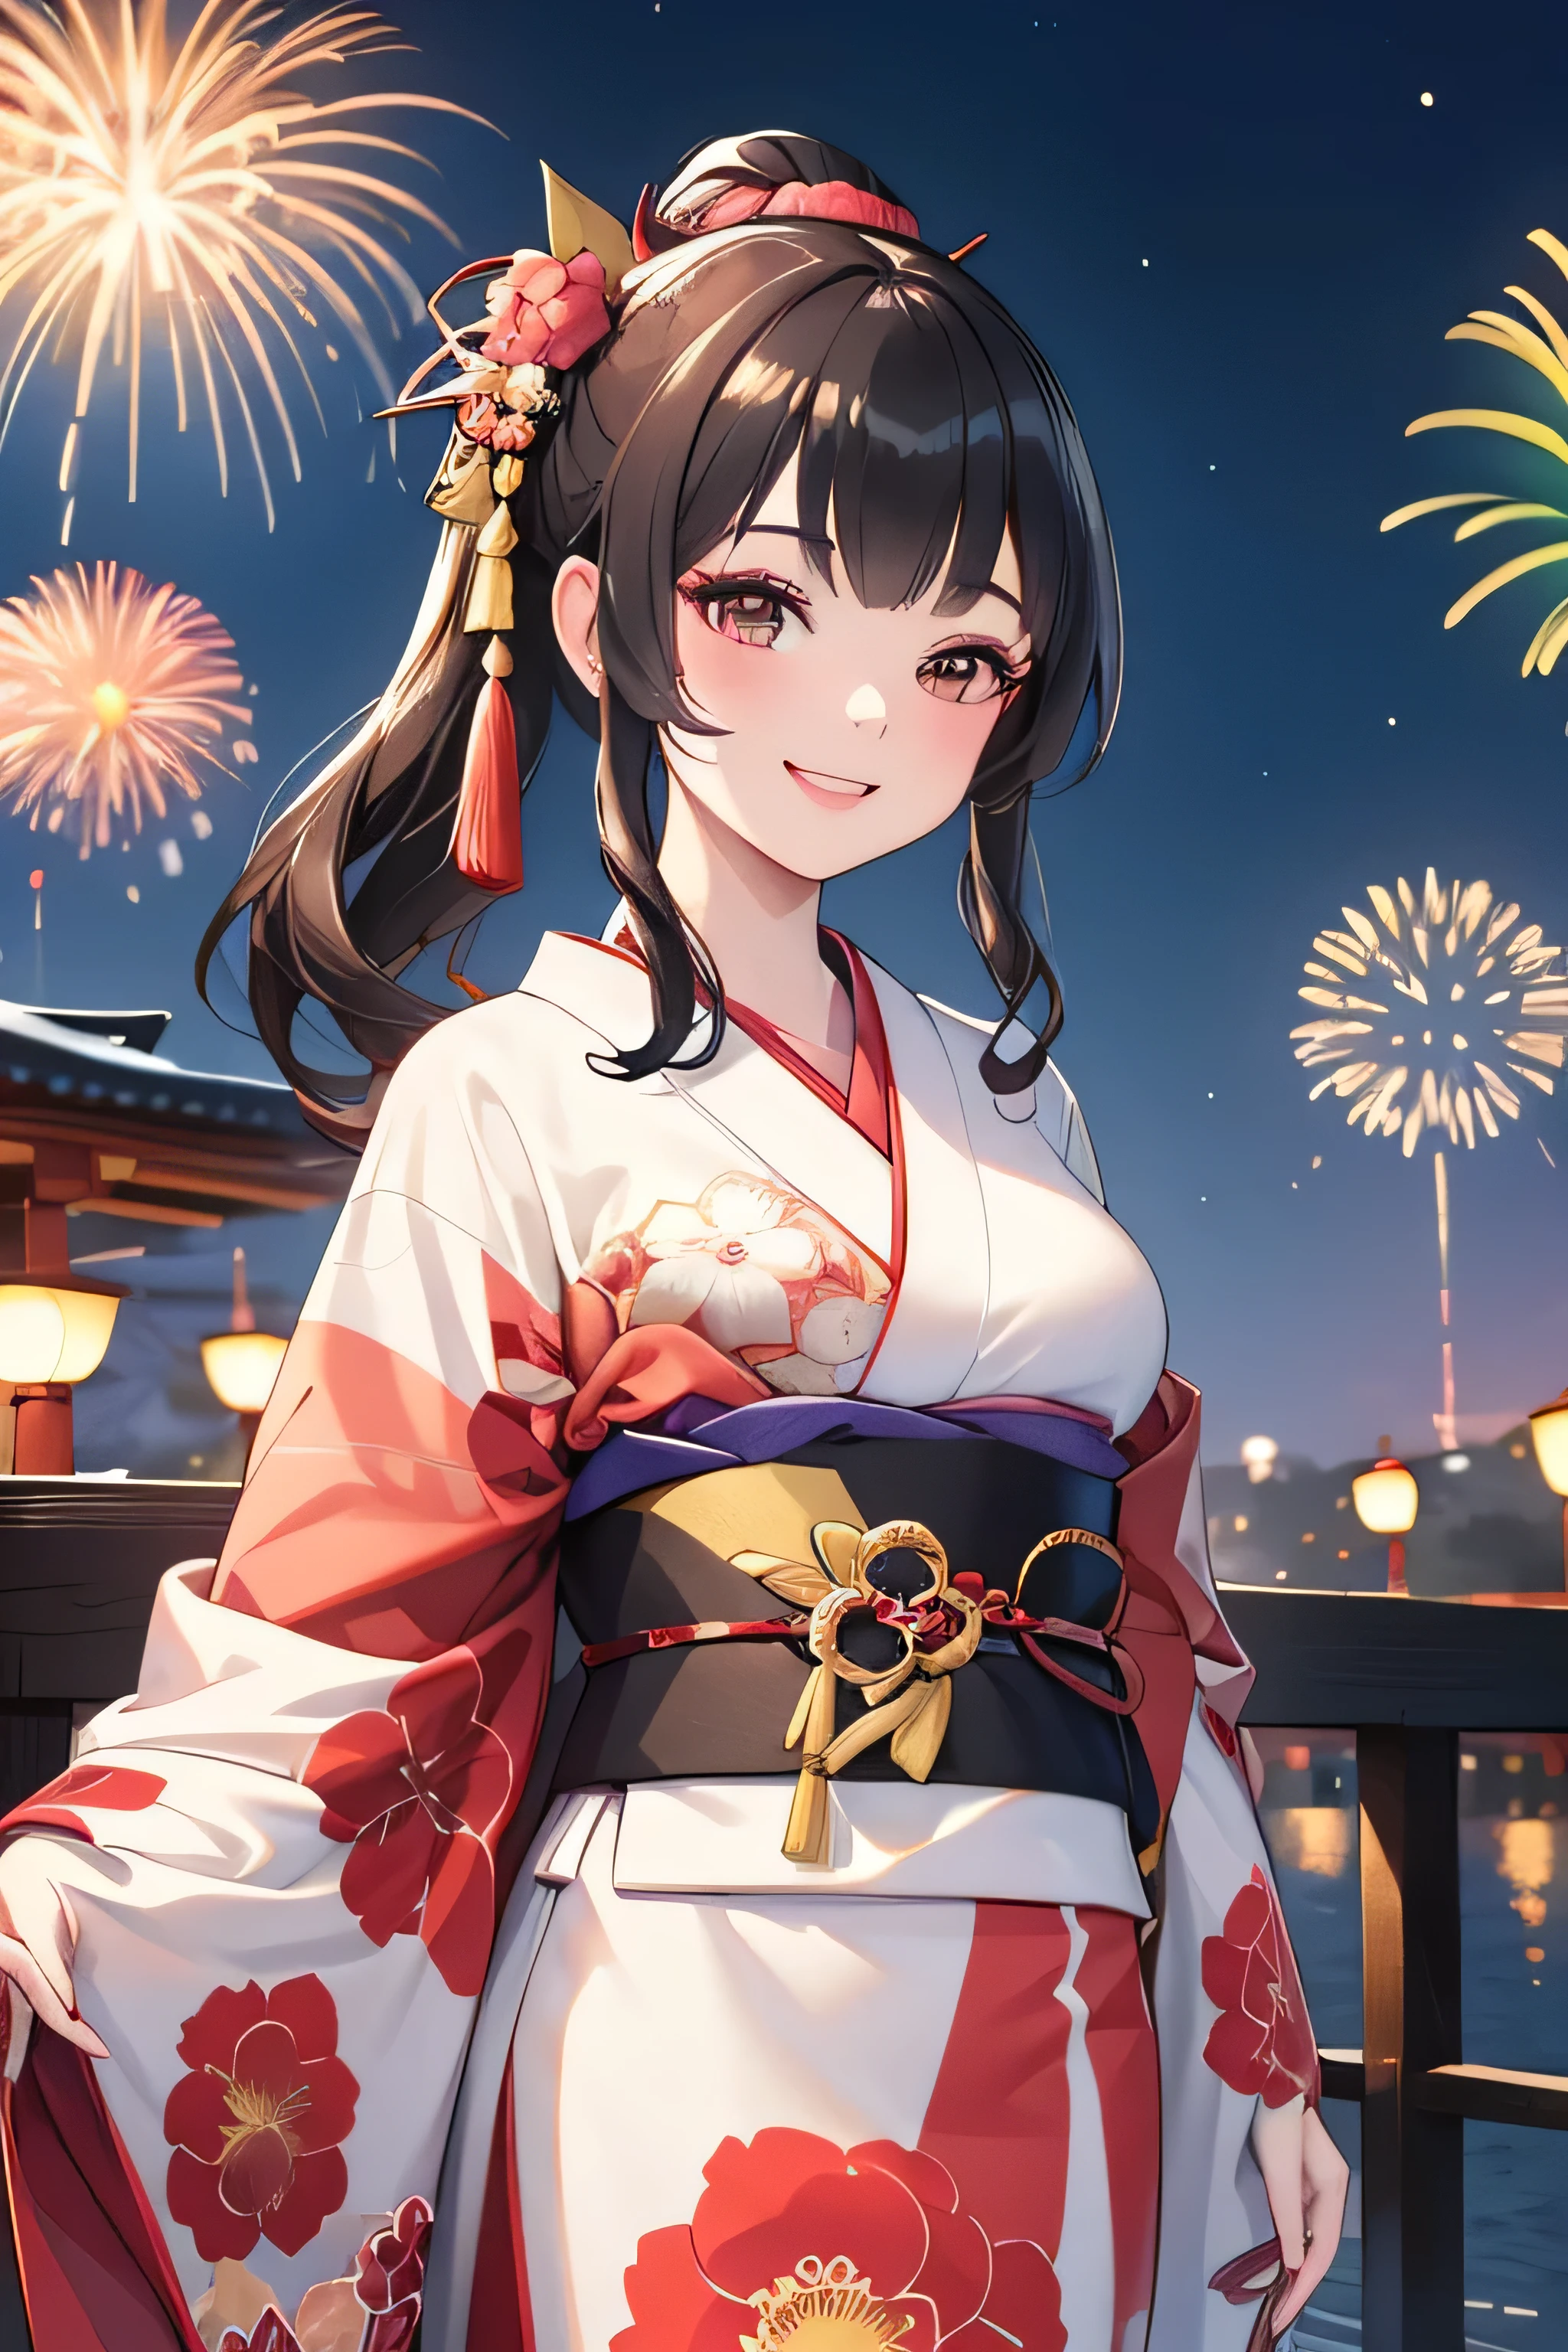 highest quality, masterpiece, High resolution, Very detailed, Accurate and perfect anatomy, 18-year-old girl, Kimono with camellia pattern,Smiling, firework,   Japanese festivals, night,